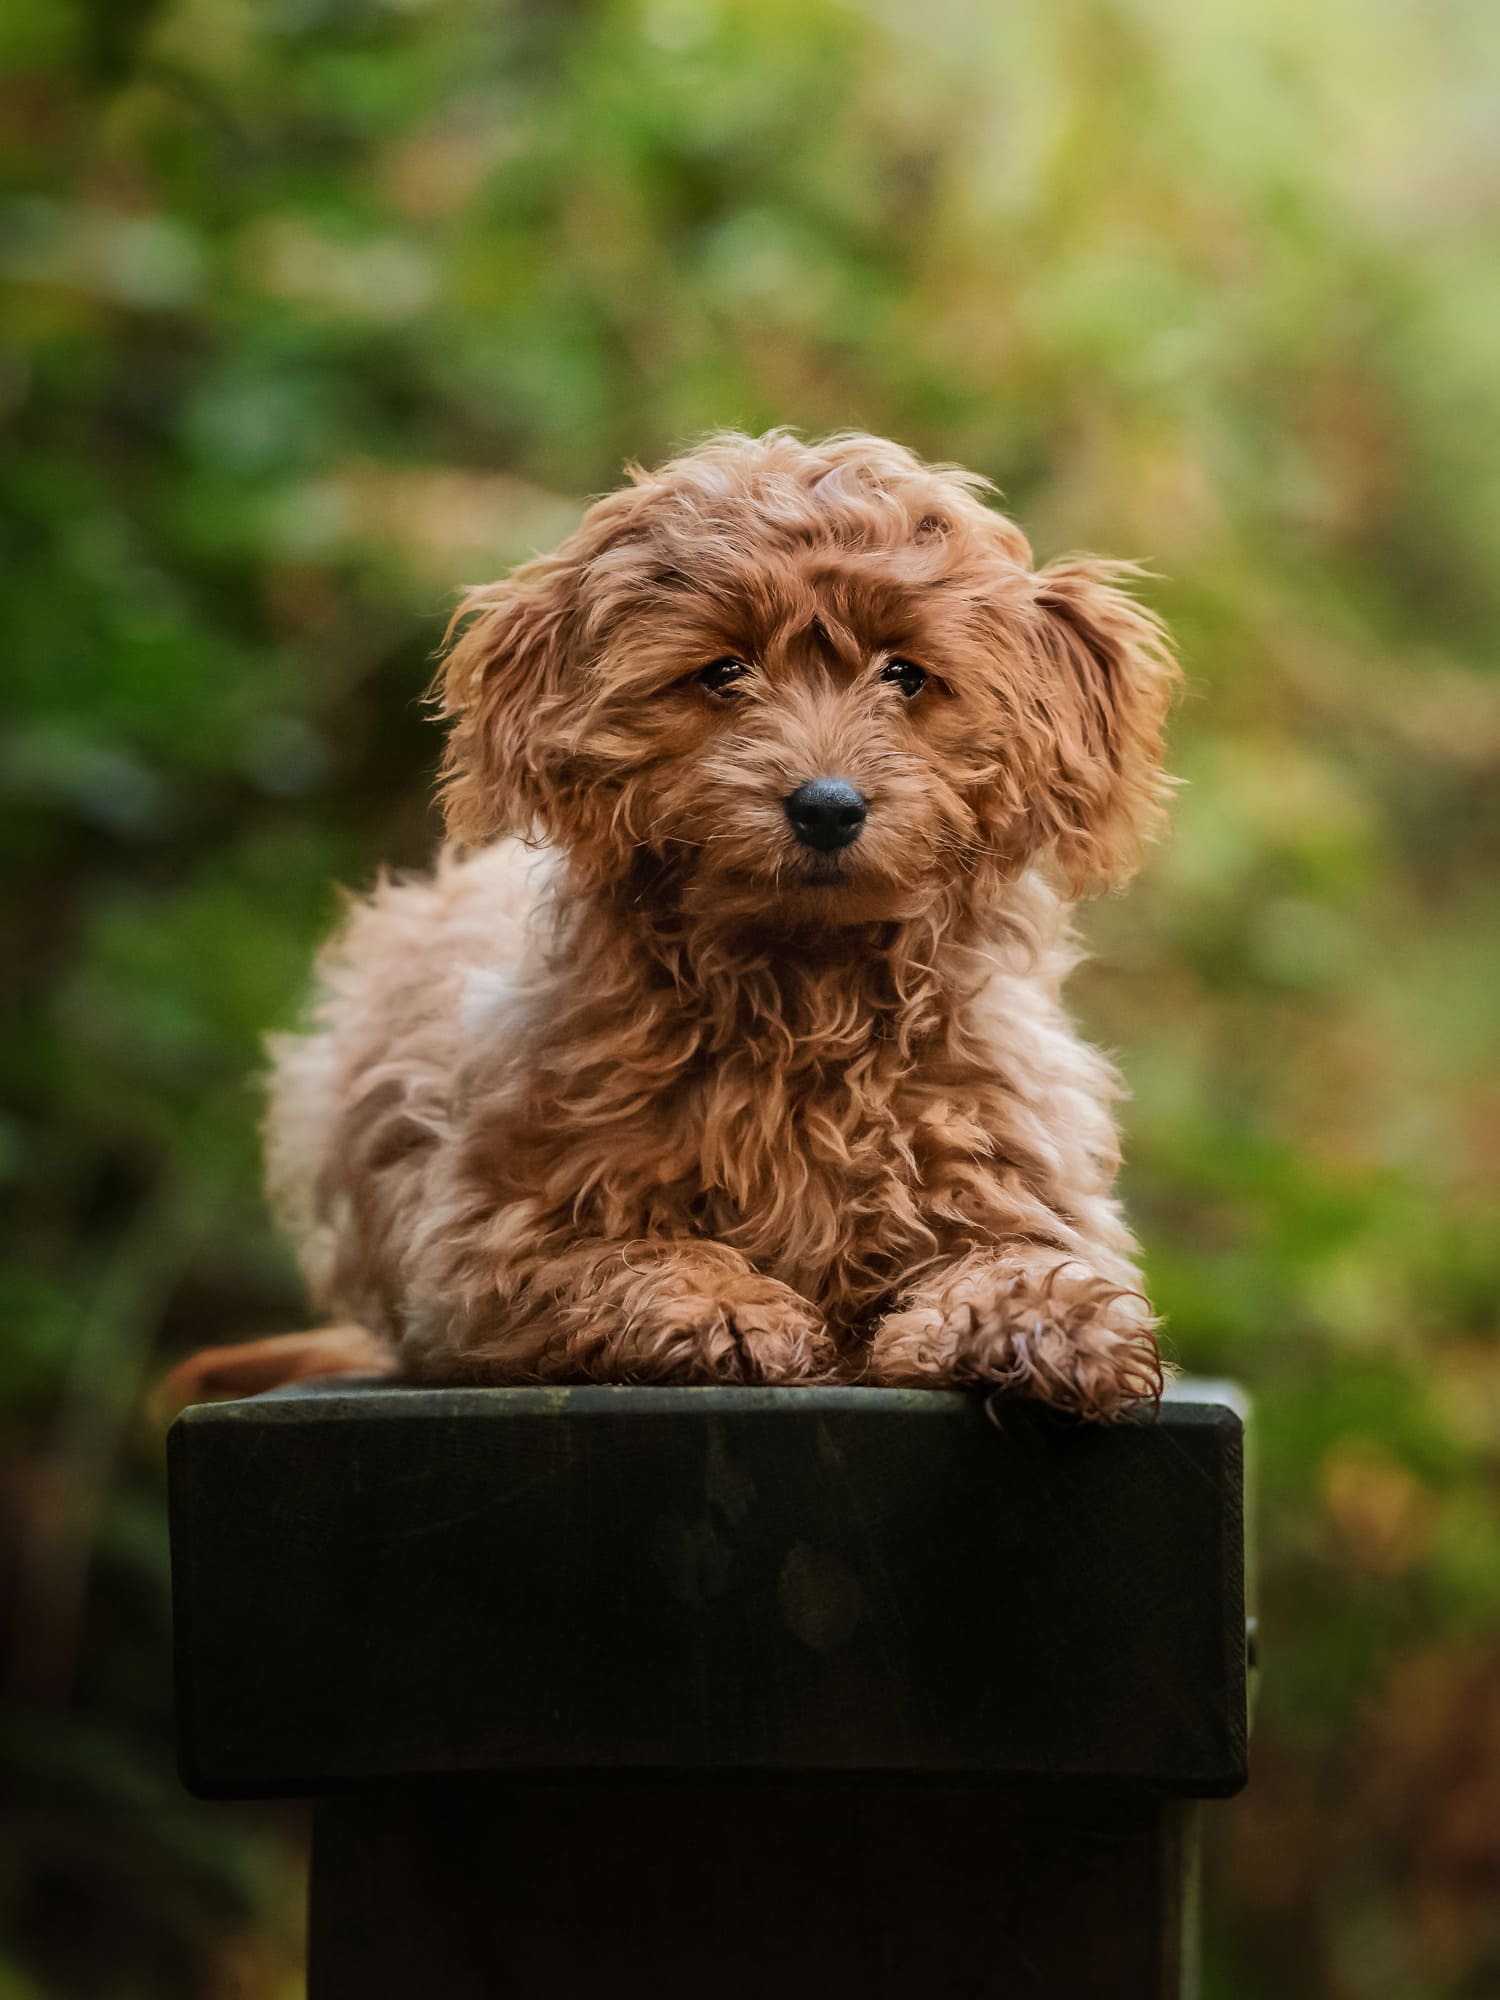 Nic bisseker Photography Dog photographer WEst sussex